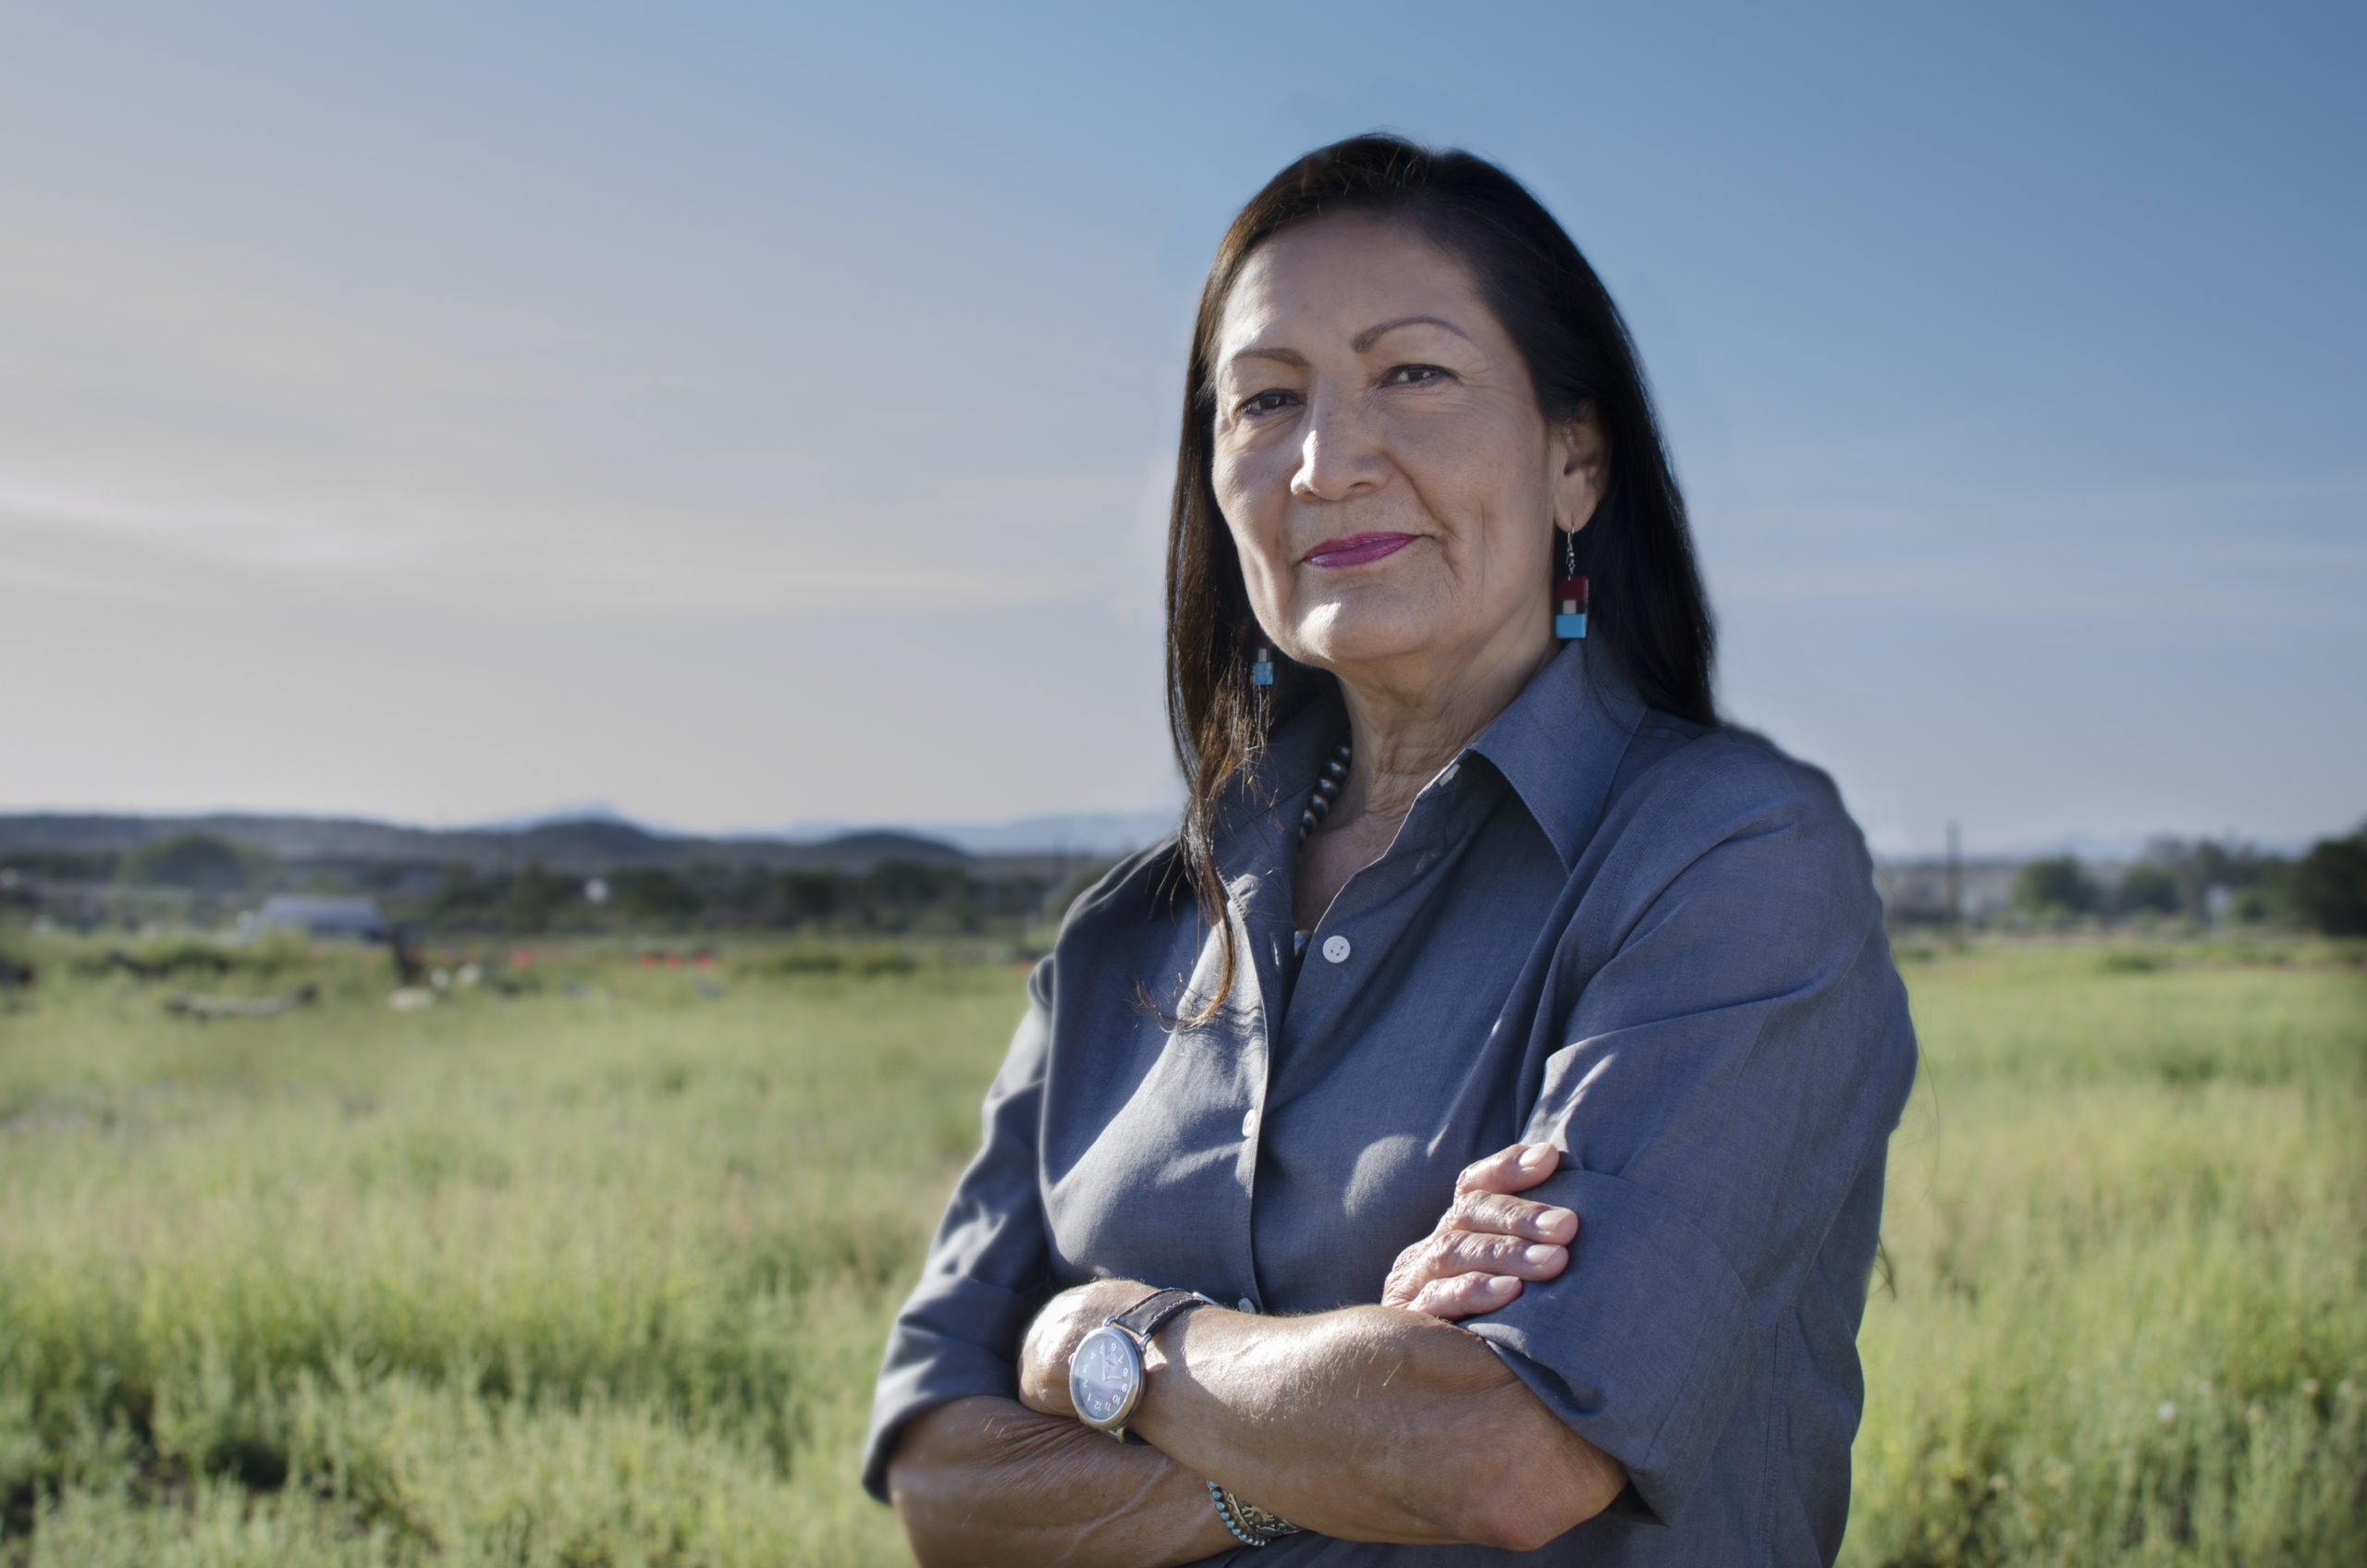 A New Mexican woman with dark hair and turquoise earrings crosses her arms and looks at the camera in an open field.